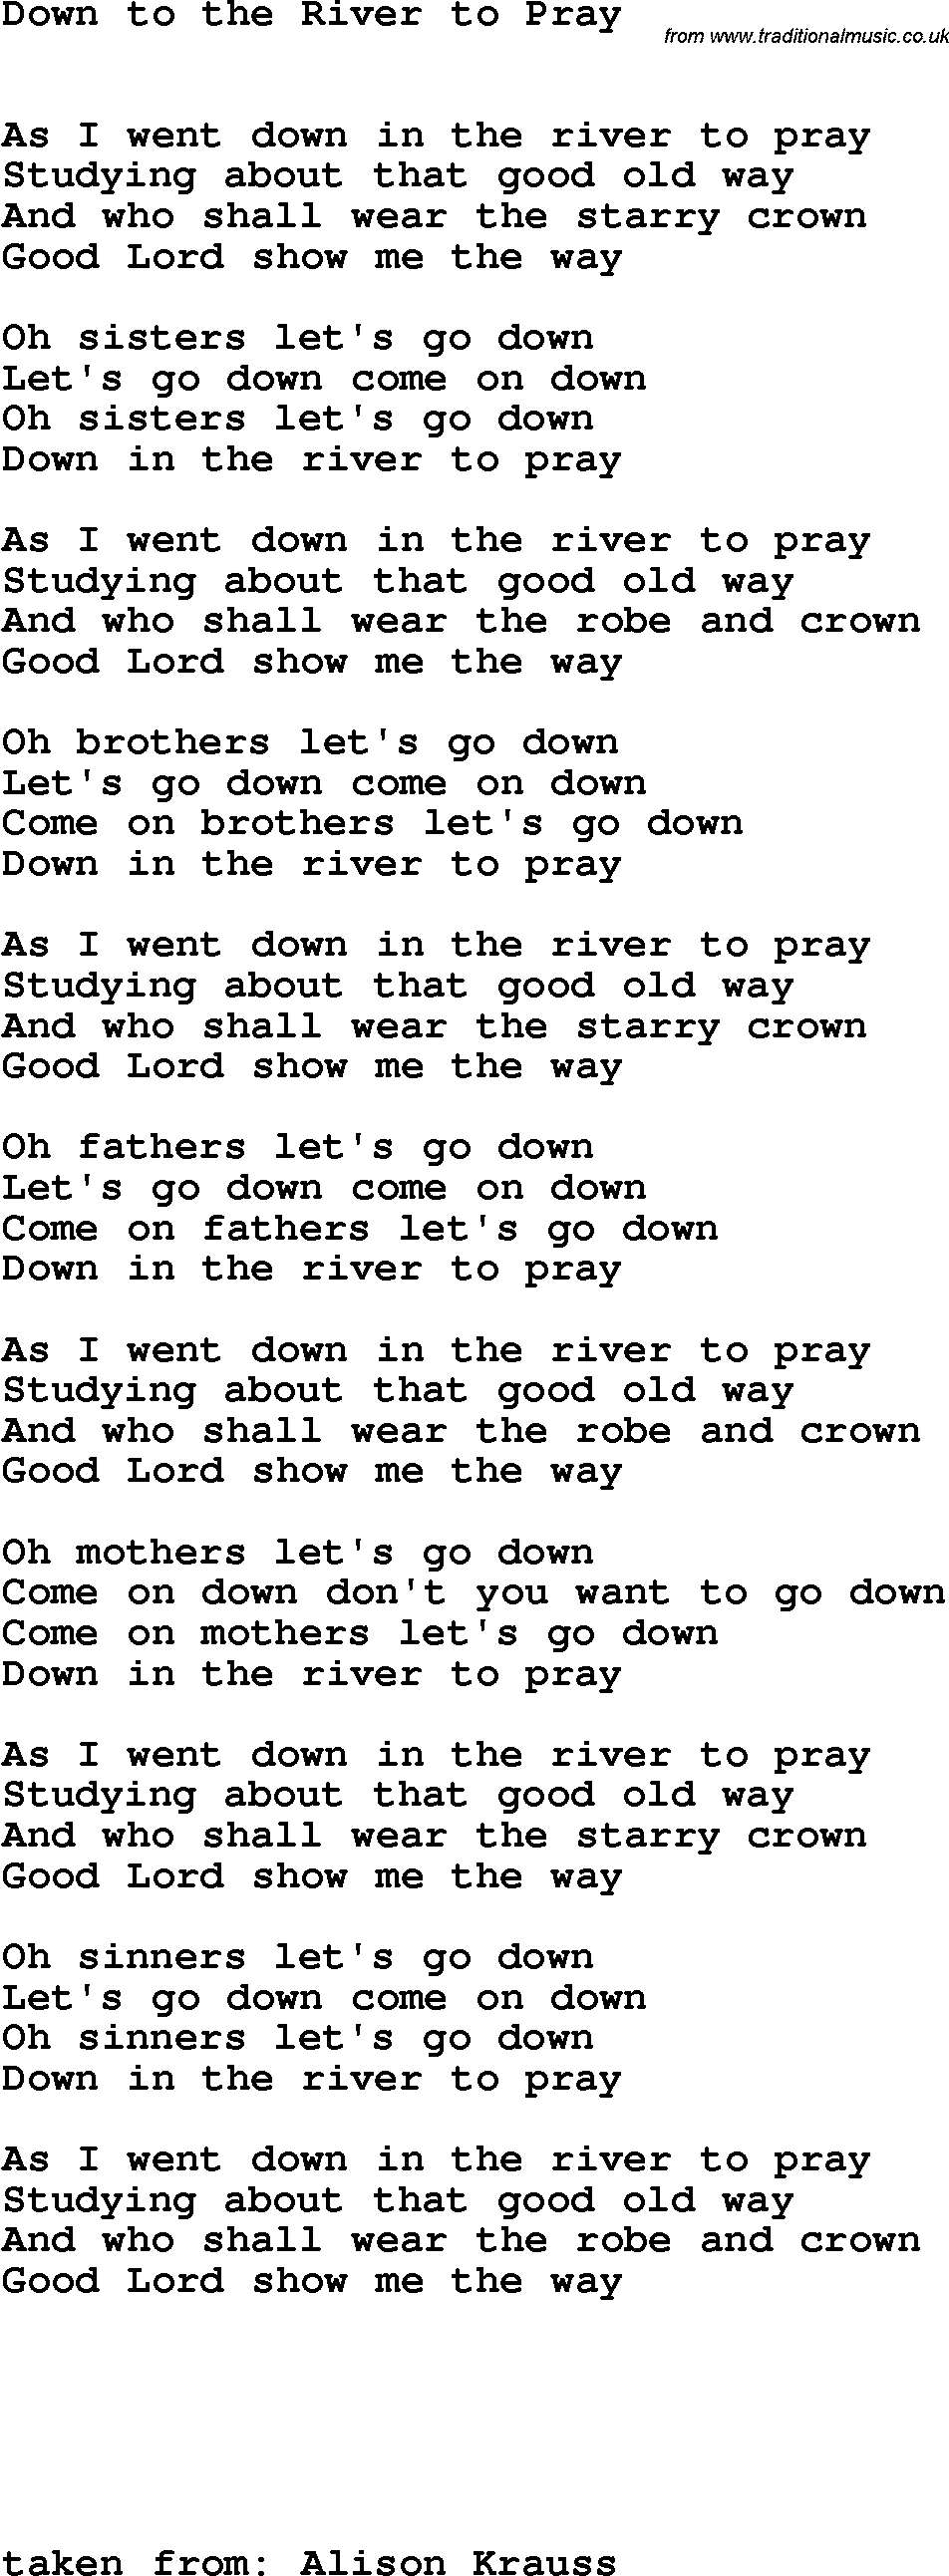 Country, Southern and Bluegrass Gospel Song Down To The River To Pray lyrics 